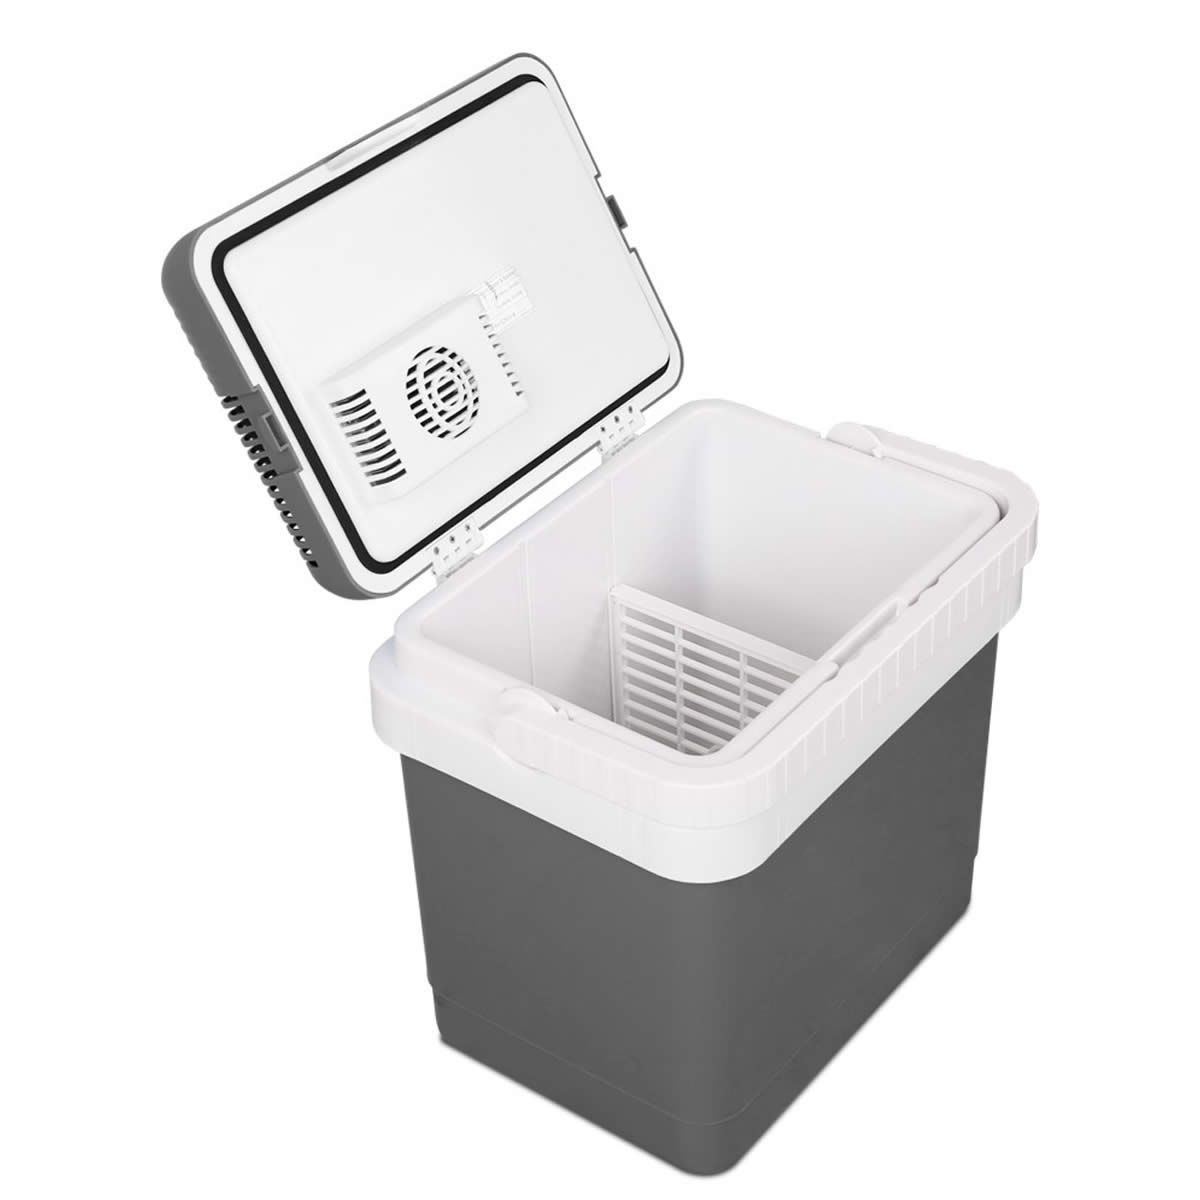 25L 2-in-1 Portable Cooler and Warmer - Grey | Crazy Sales